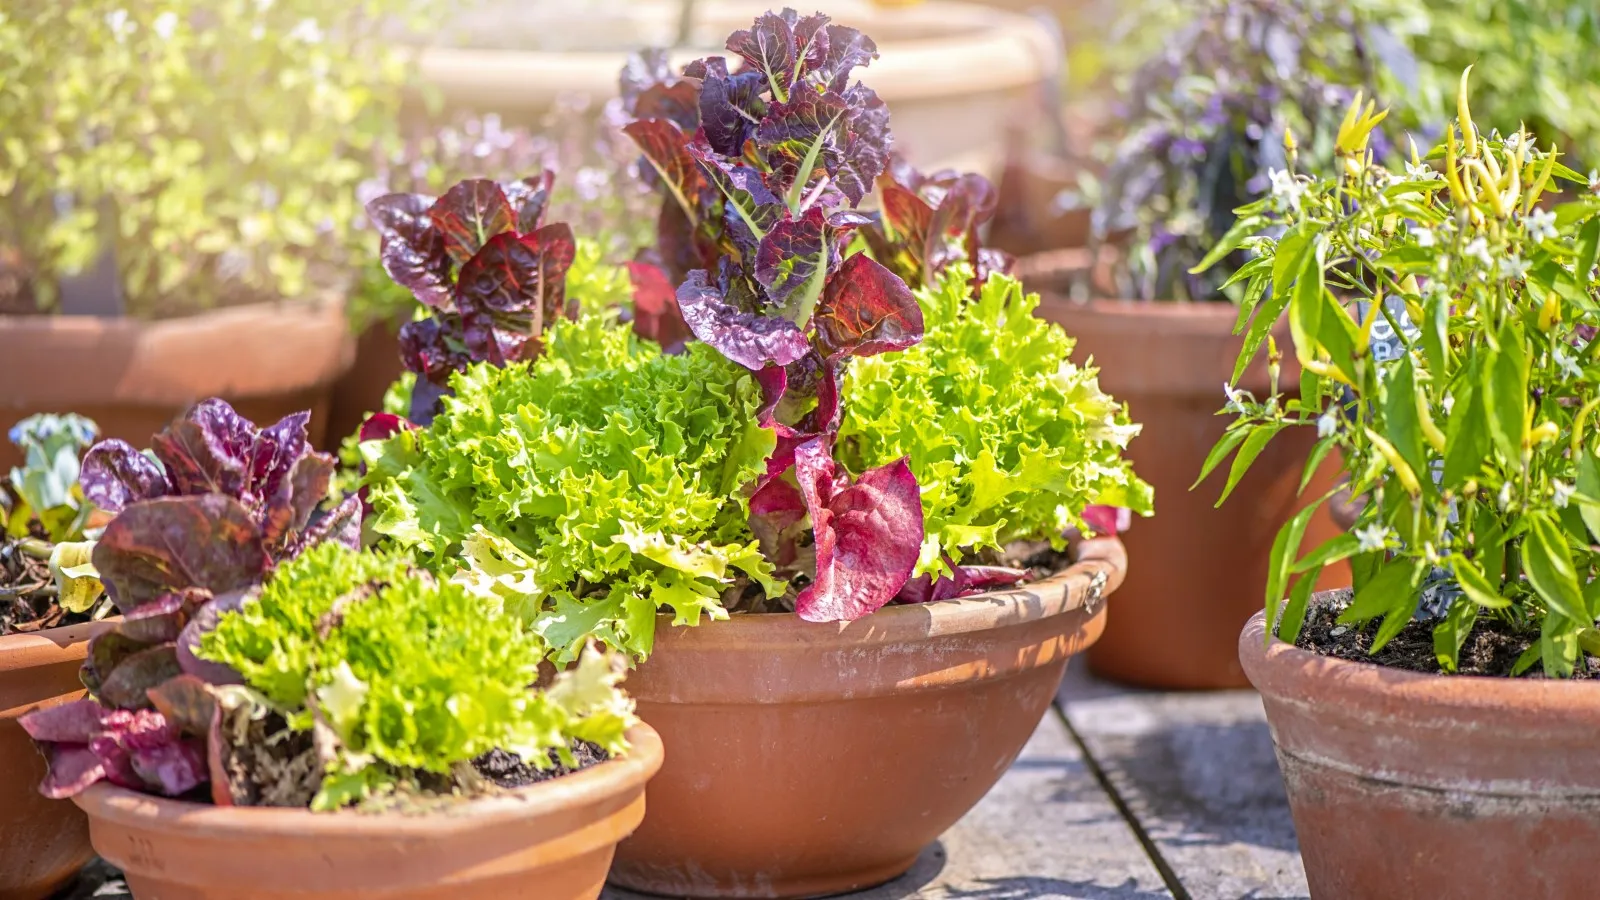 12 best vegetables to grow in pots – easy crops for spaces of any size.